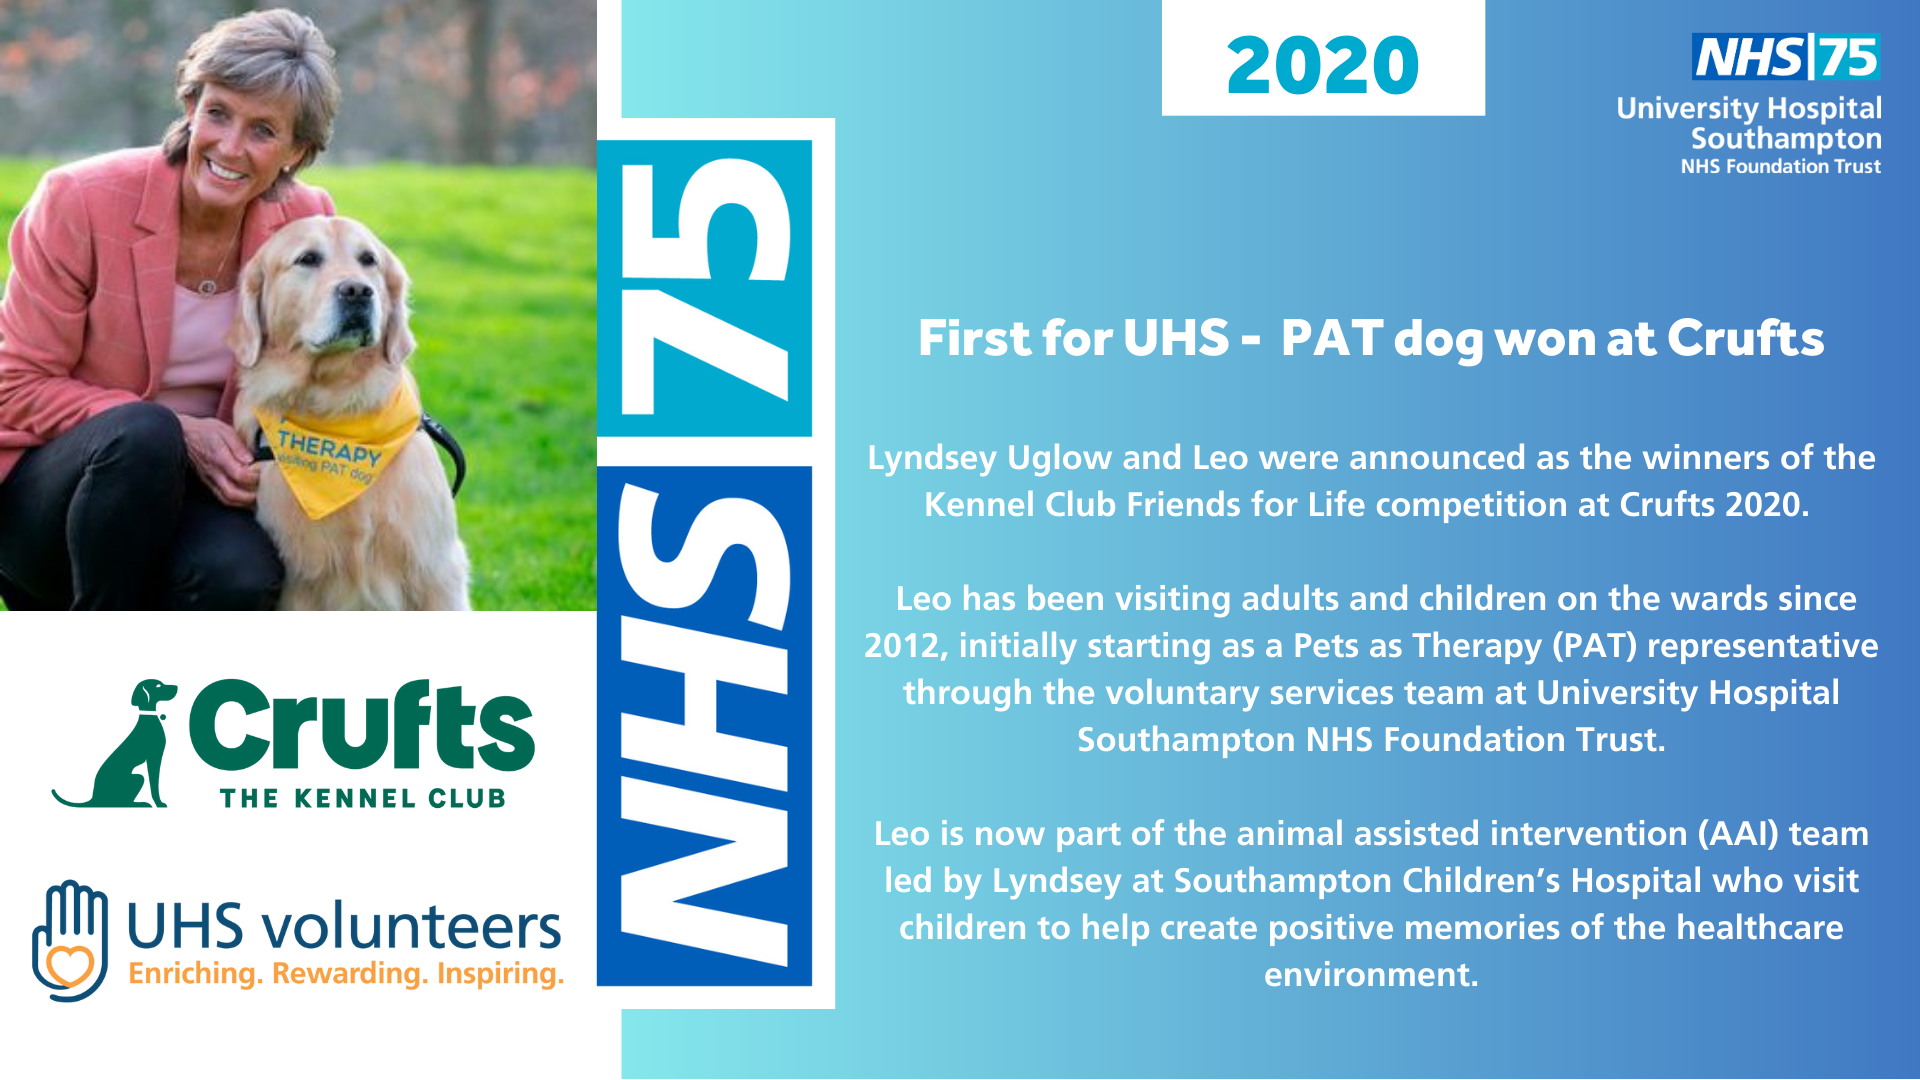 First for UHS - PAT dog won at Crufts